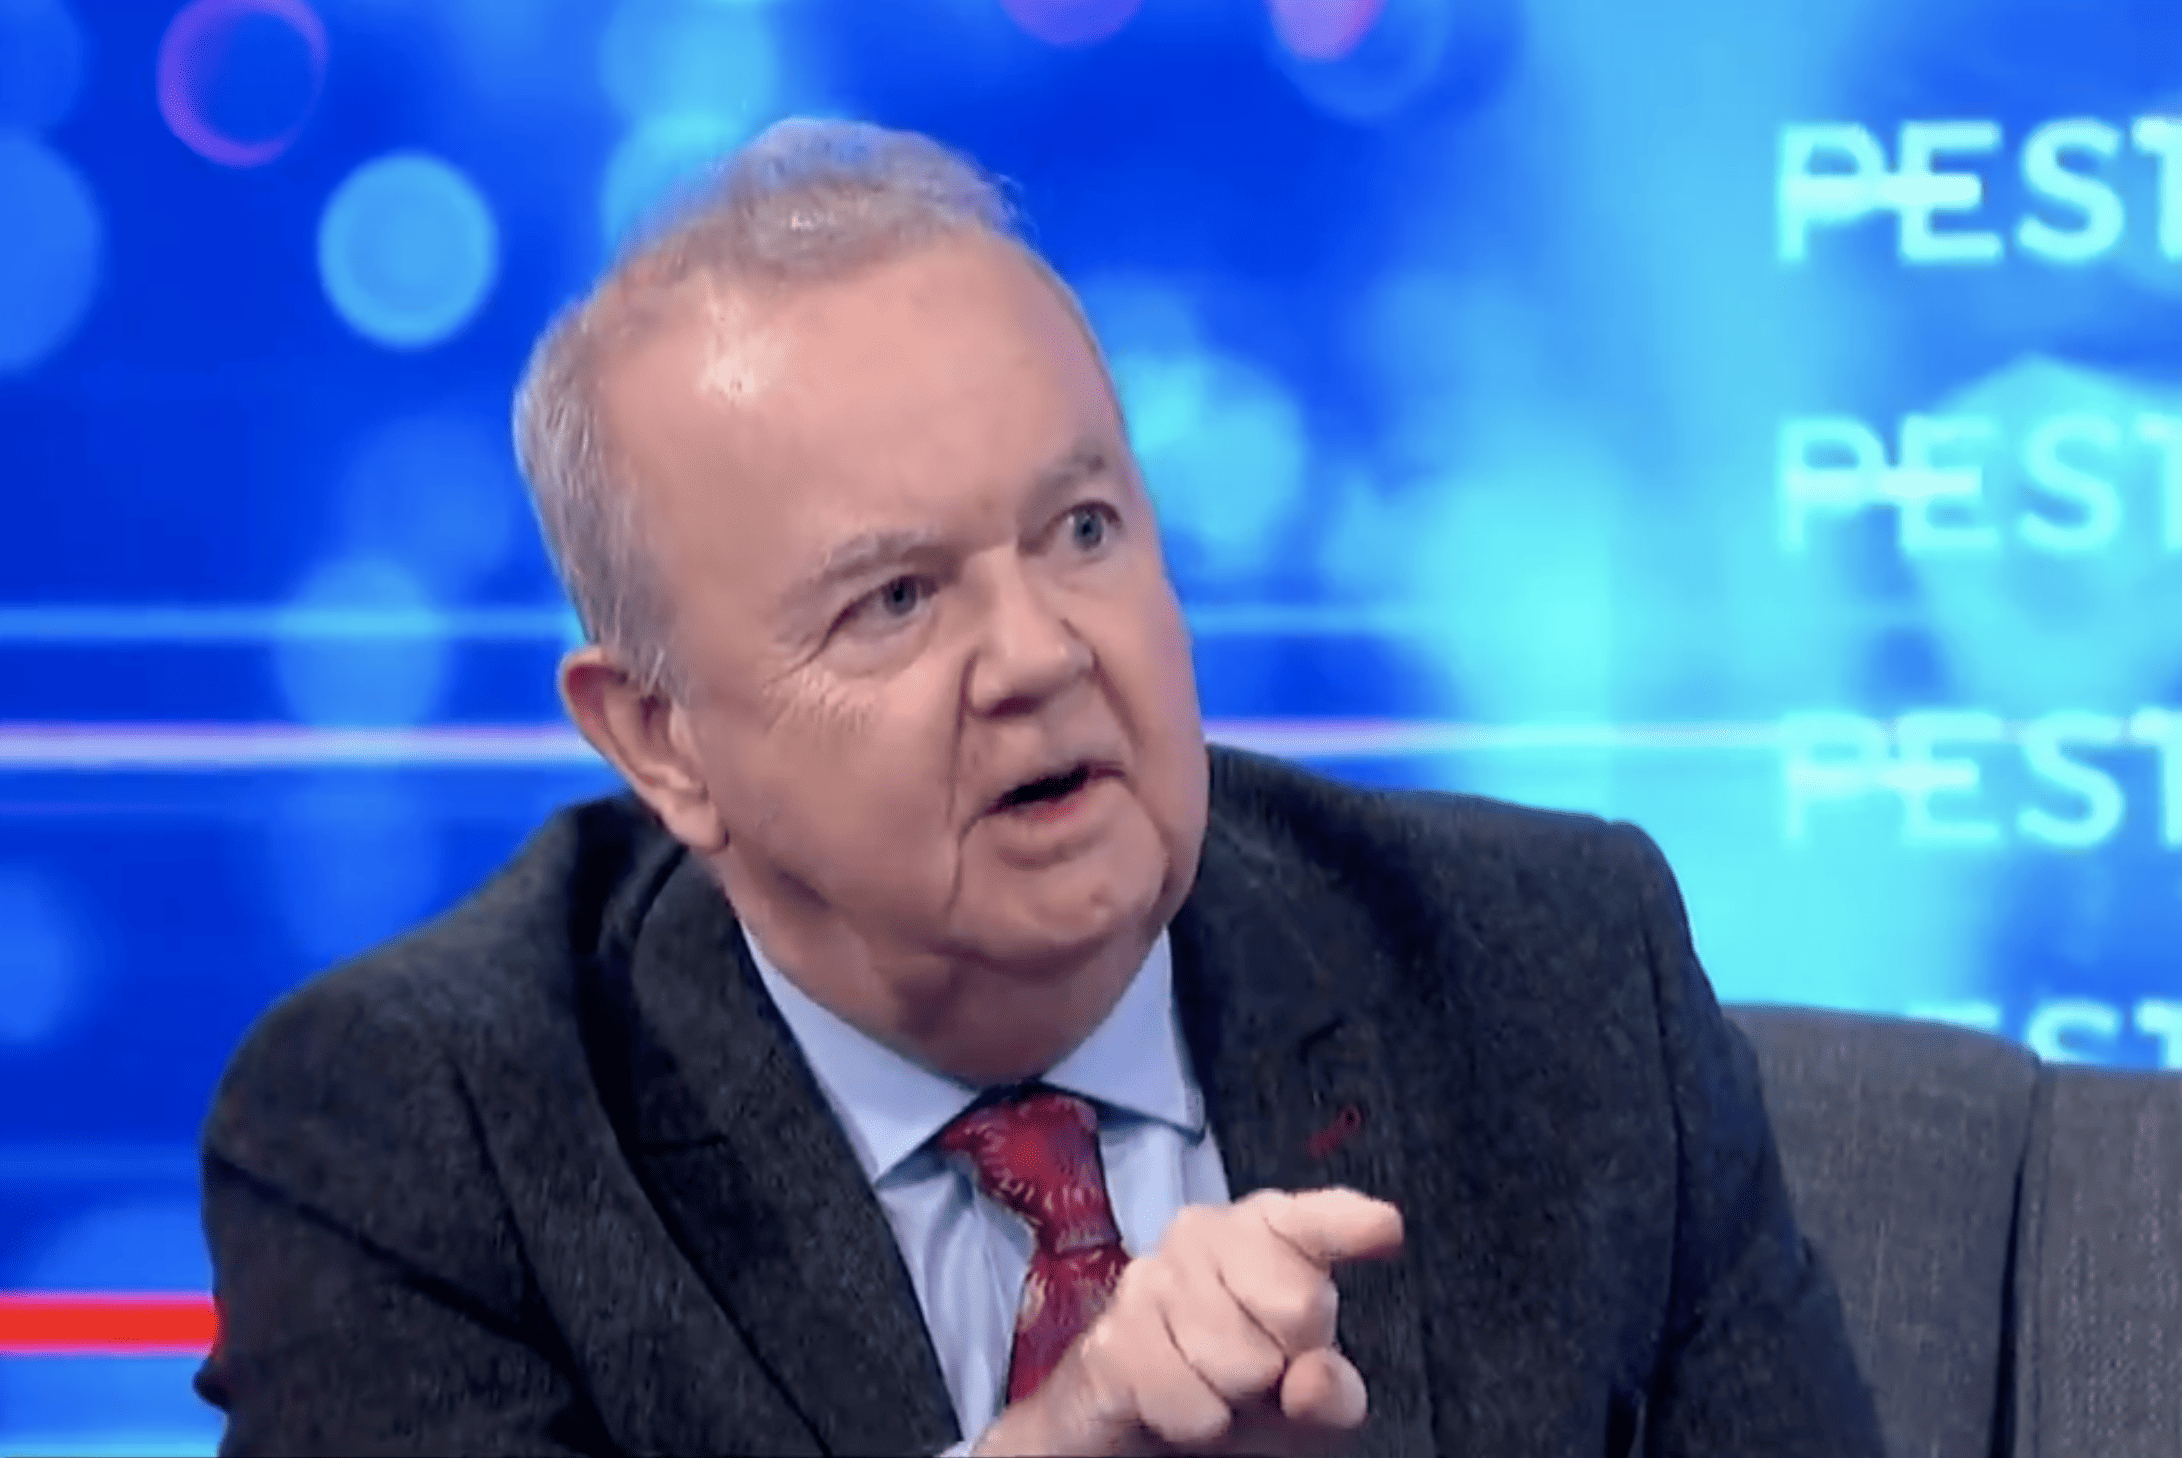 Ian Hislop nails Tory response to Post Office scandal